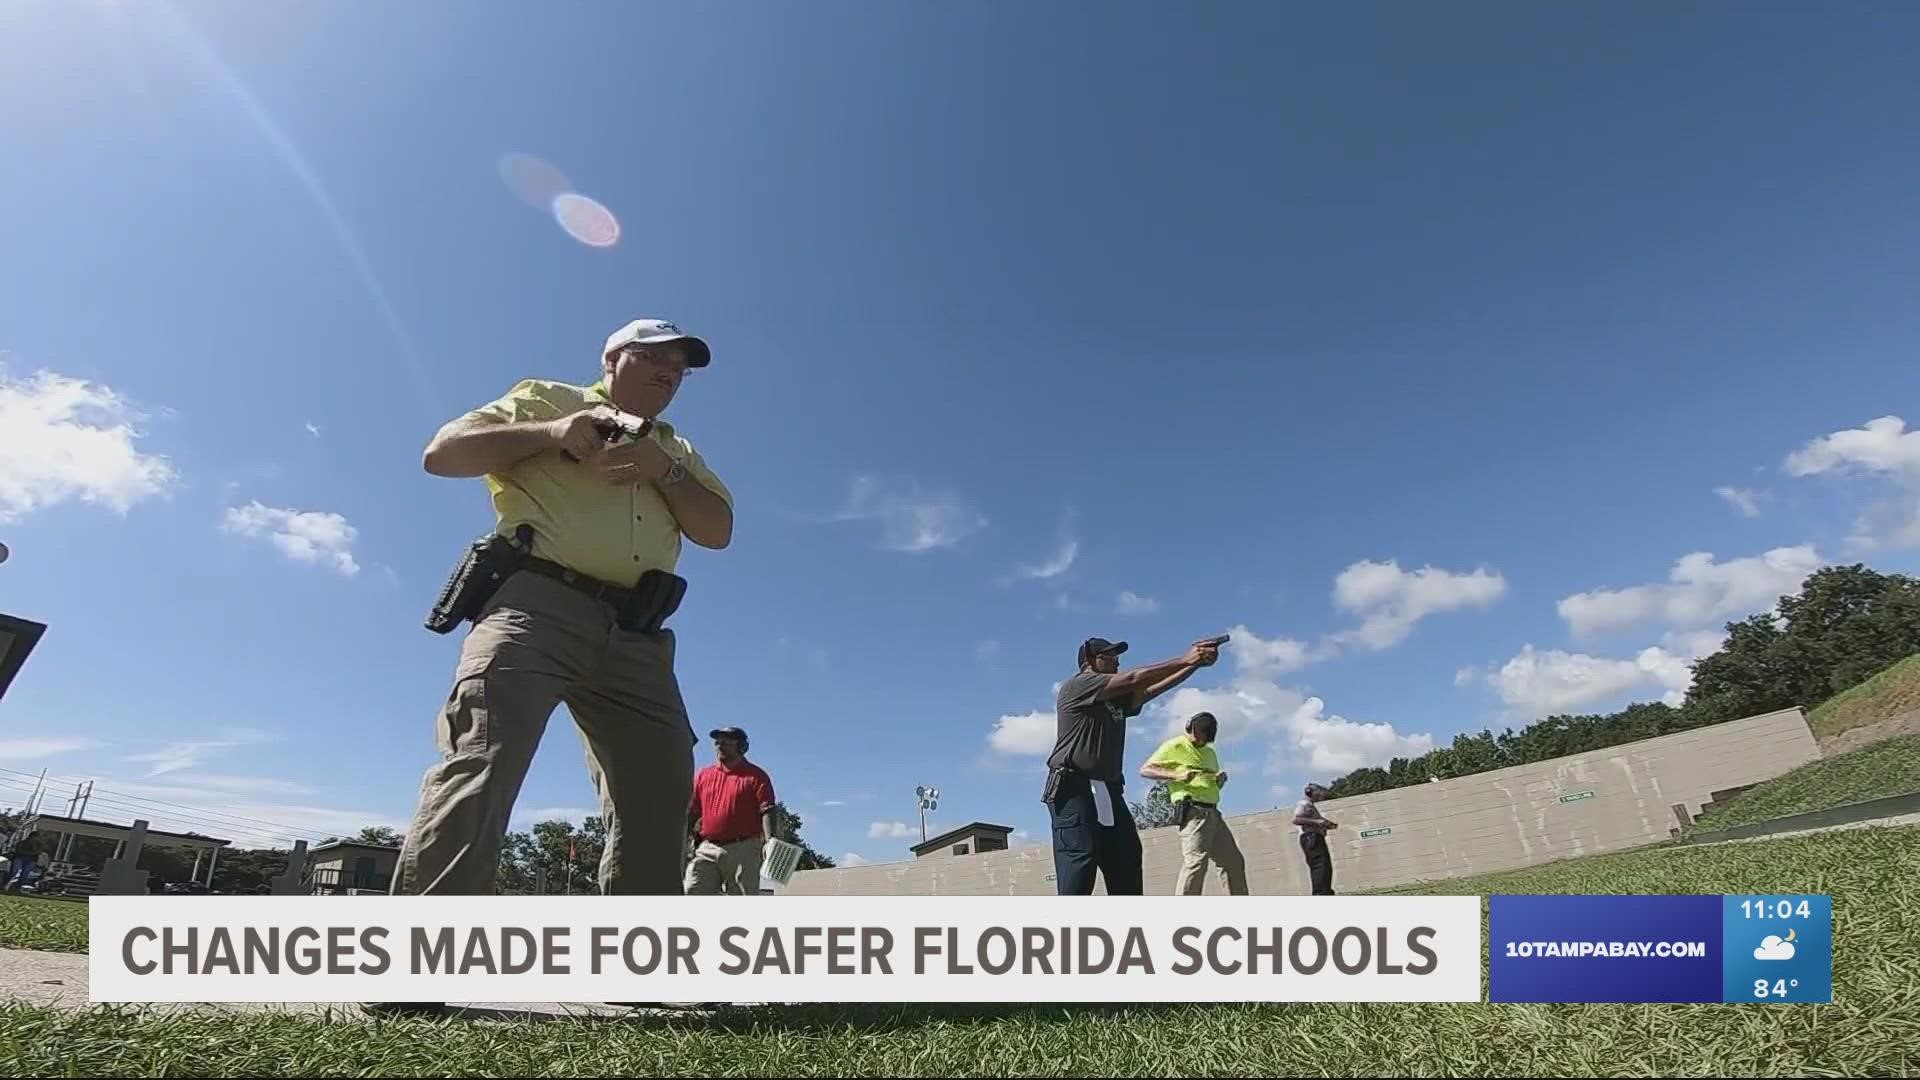 Sheriff Grady Judd said schools need more armed trained volunteers ready to intervene in the case of a dangerous situation on school grounds.